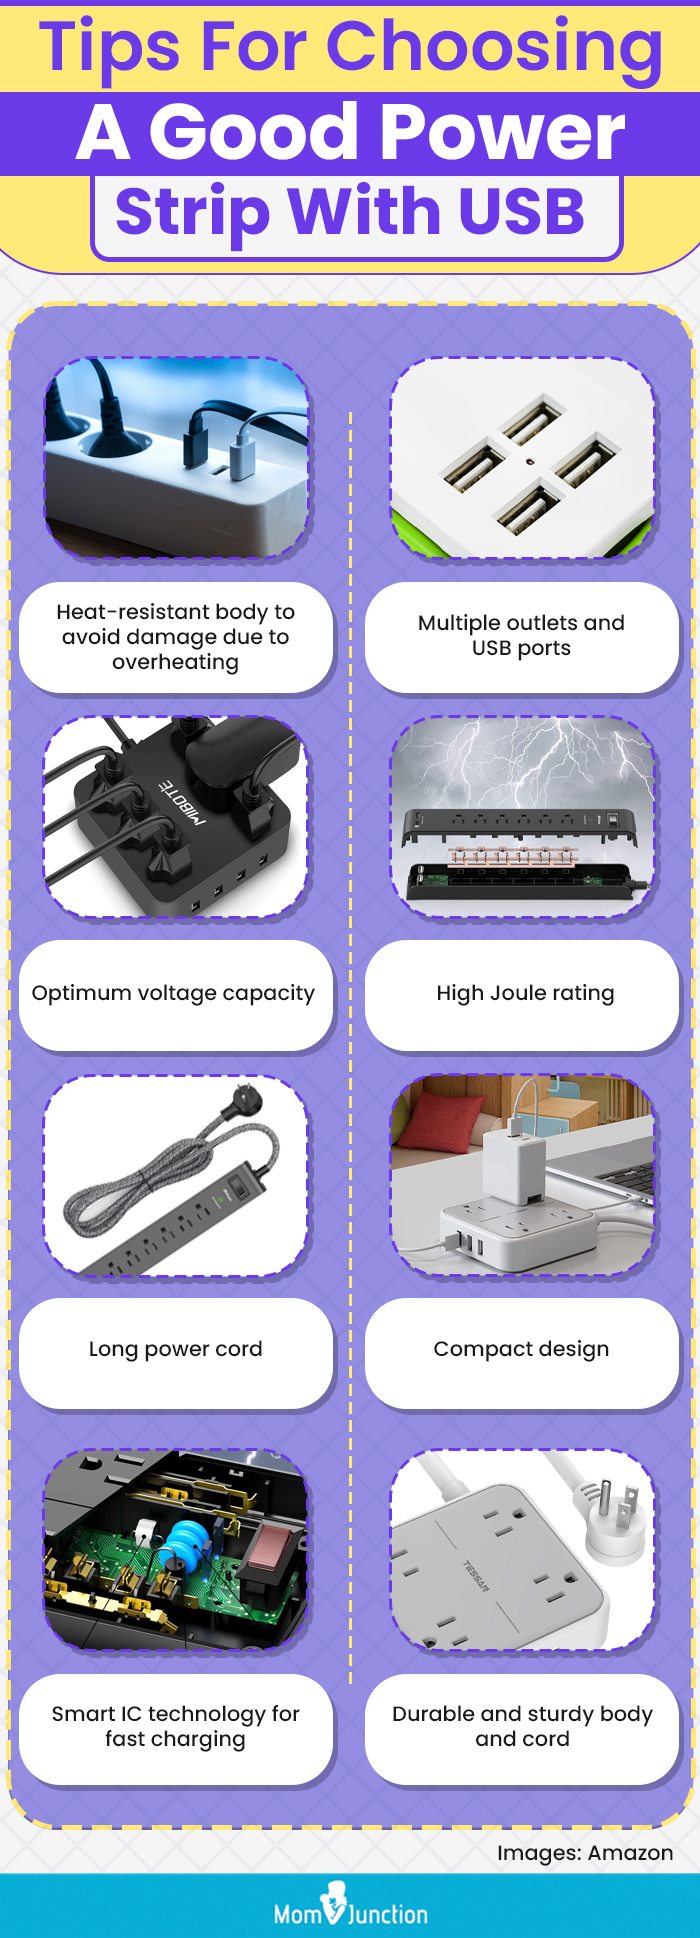 Tips For Choosing A Good Power Strip With USB (infographic)